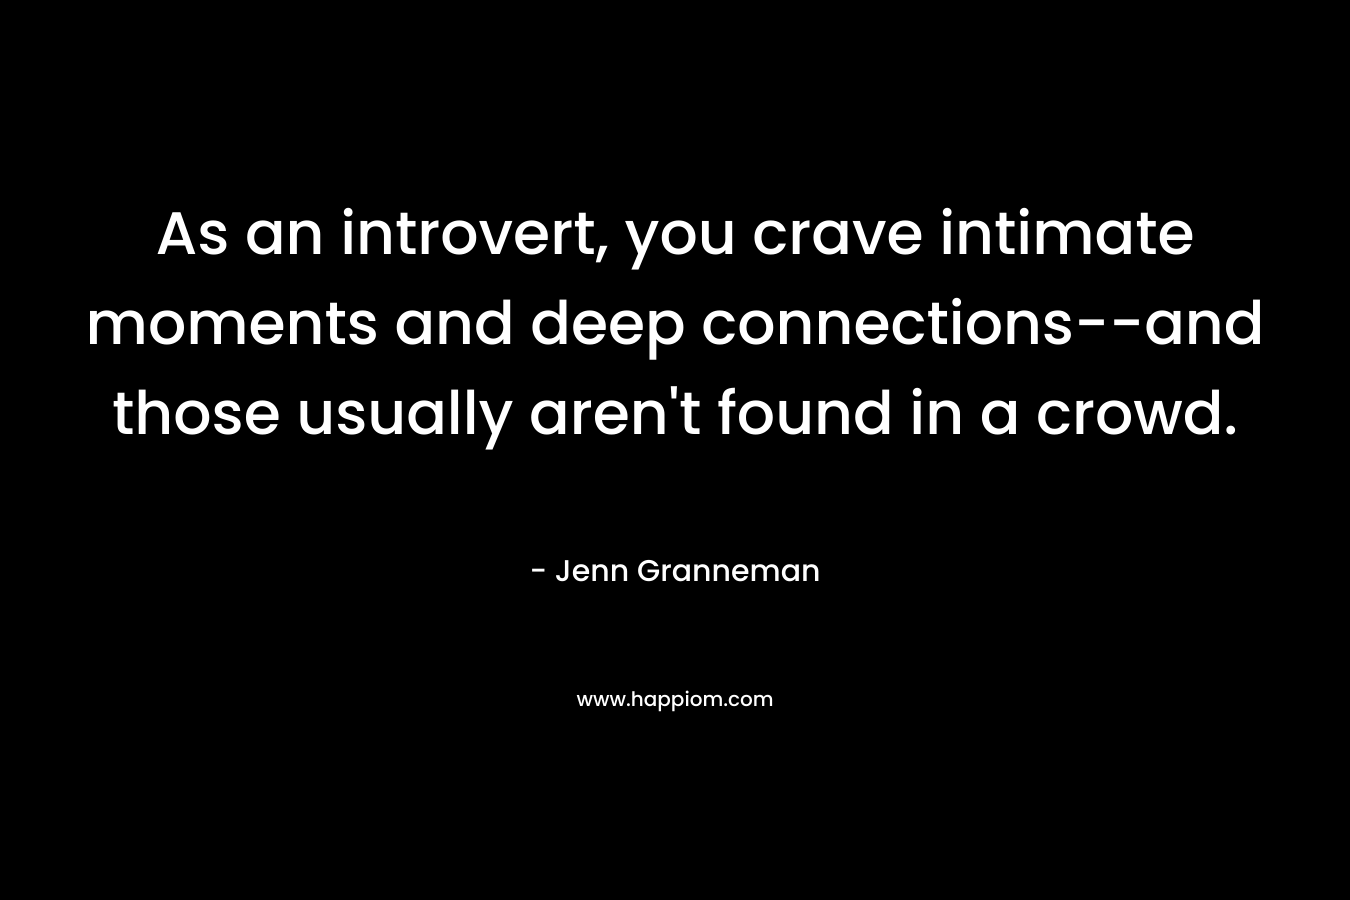 As an introvert, you crave intimate moments and deep connections--and those usually aren't found in a crowd.